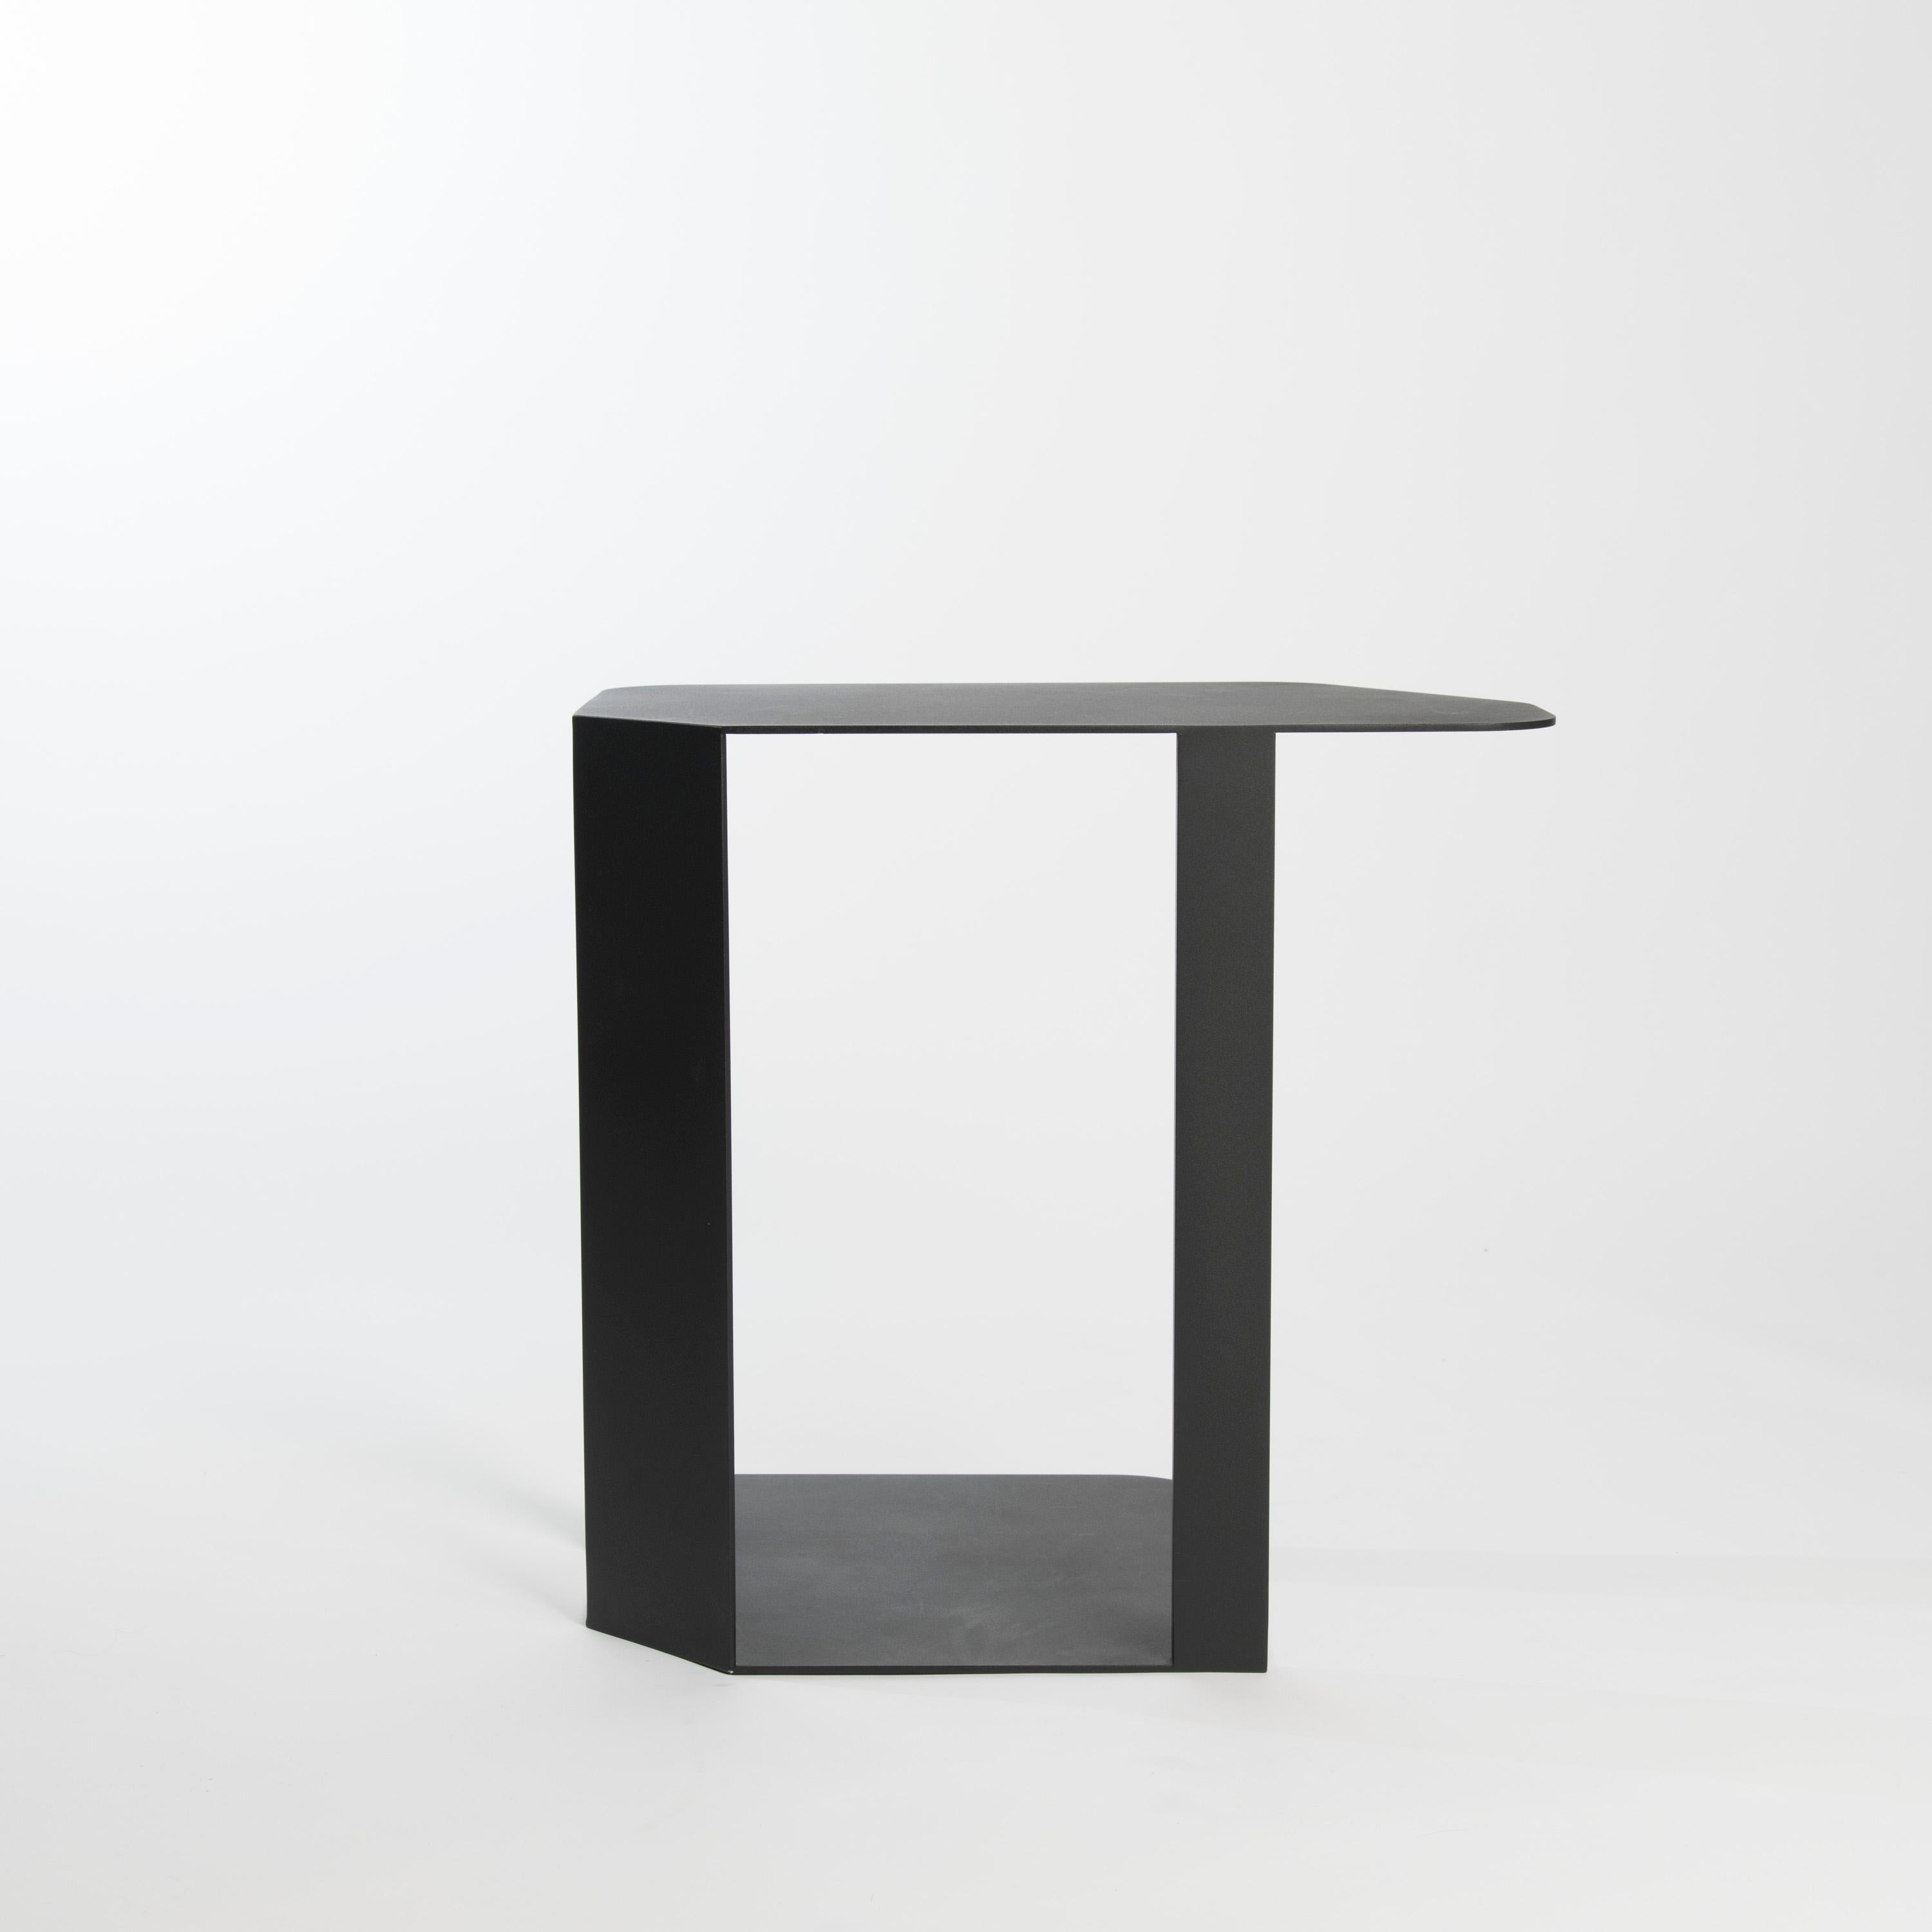 Minimal and contemporary side table (sofa table or end table) in aluminium for home office, workspace, or horeca spaces.
om37 is designed to be large enough to work with a laptop (62 x 38 cm), and has a perfect high (60 cm) from your sofa or